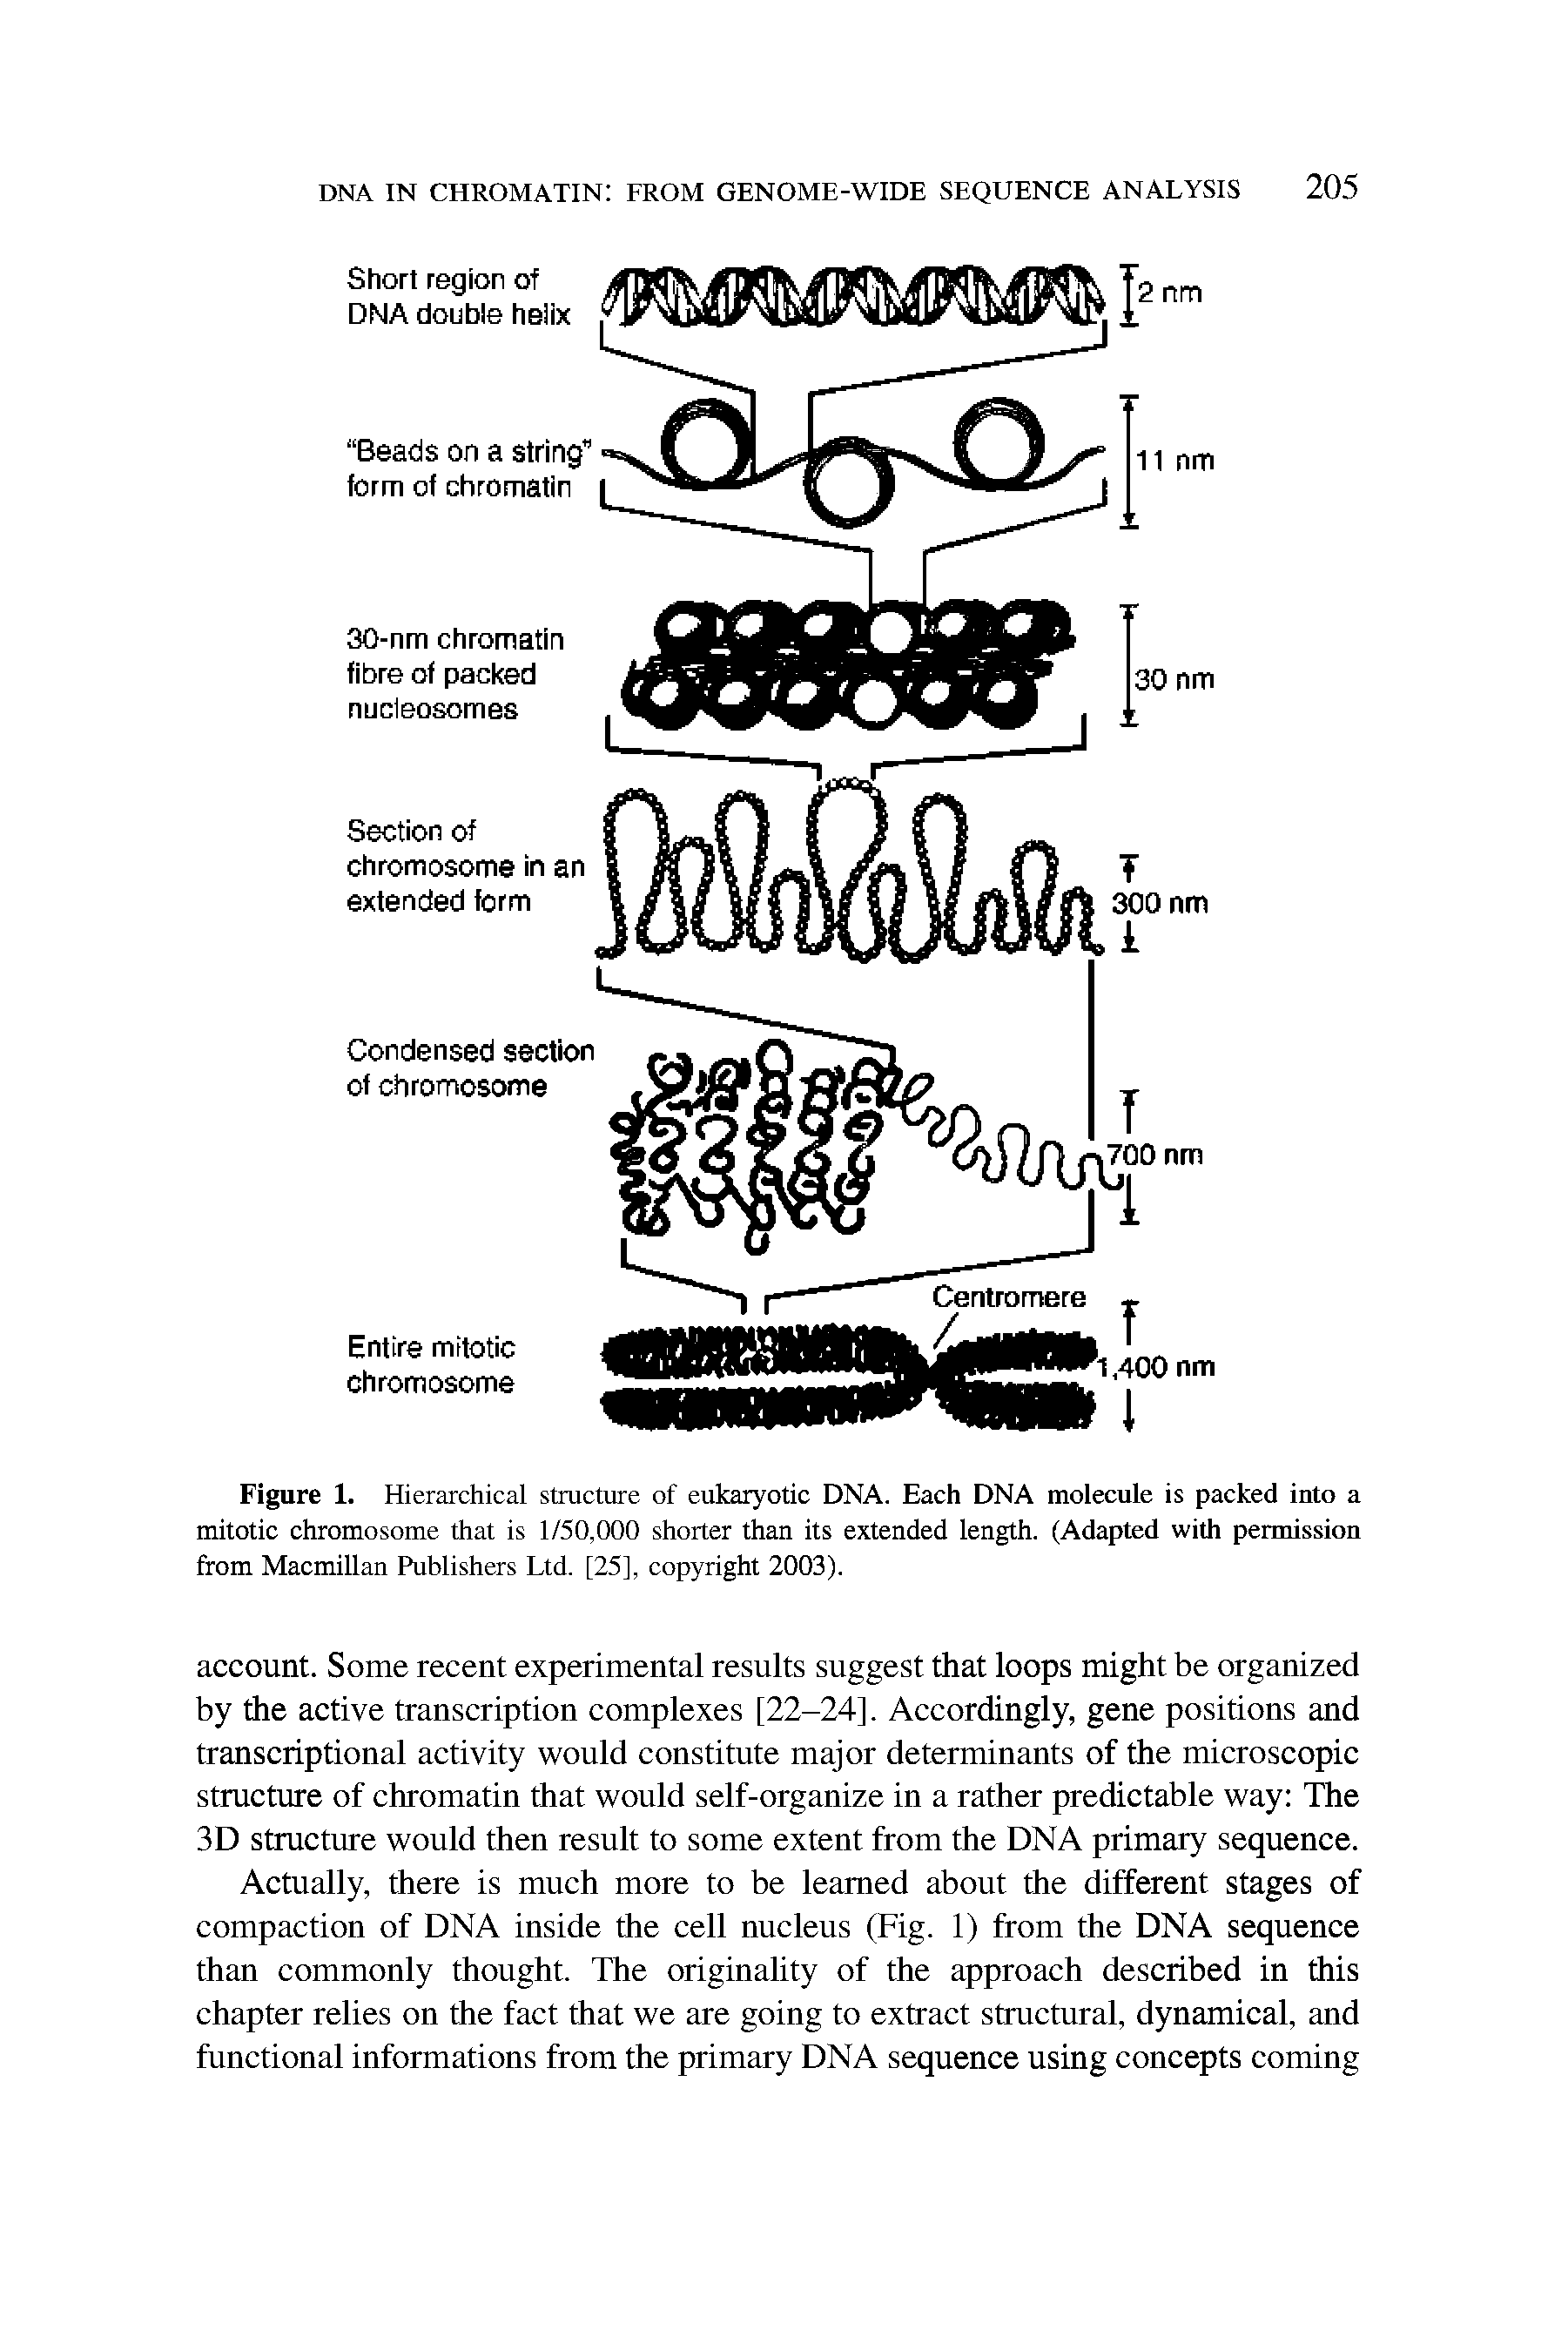 Figure 1. Hierarchical structure of eukaryotic DNA. Each DNA molecule is packed into a mitotic chromosome that is 1/50,000 shorter than its extended length. (Adapted with permission from Macmillan Publishers Ltd. [25], copyright 2003).